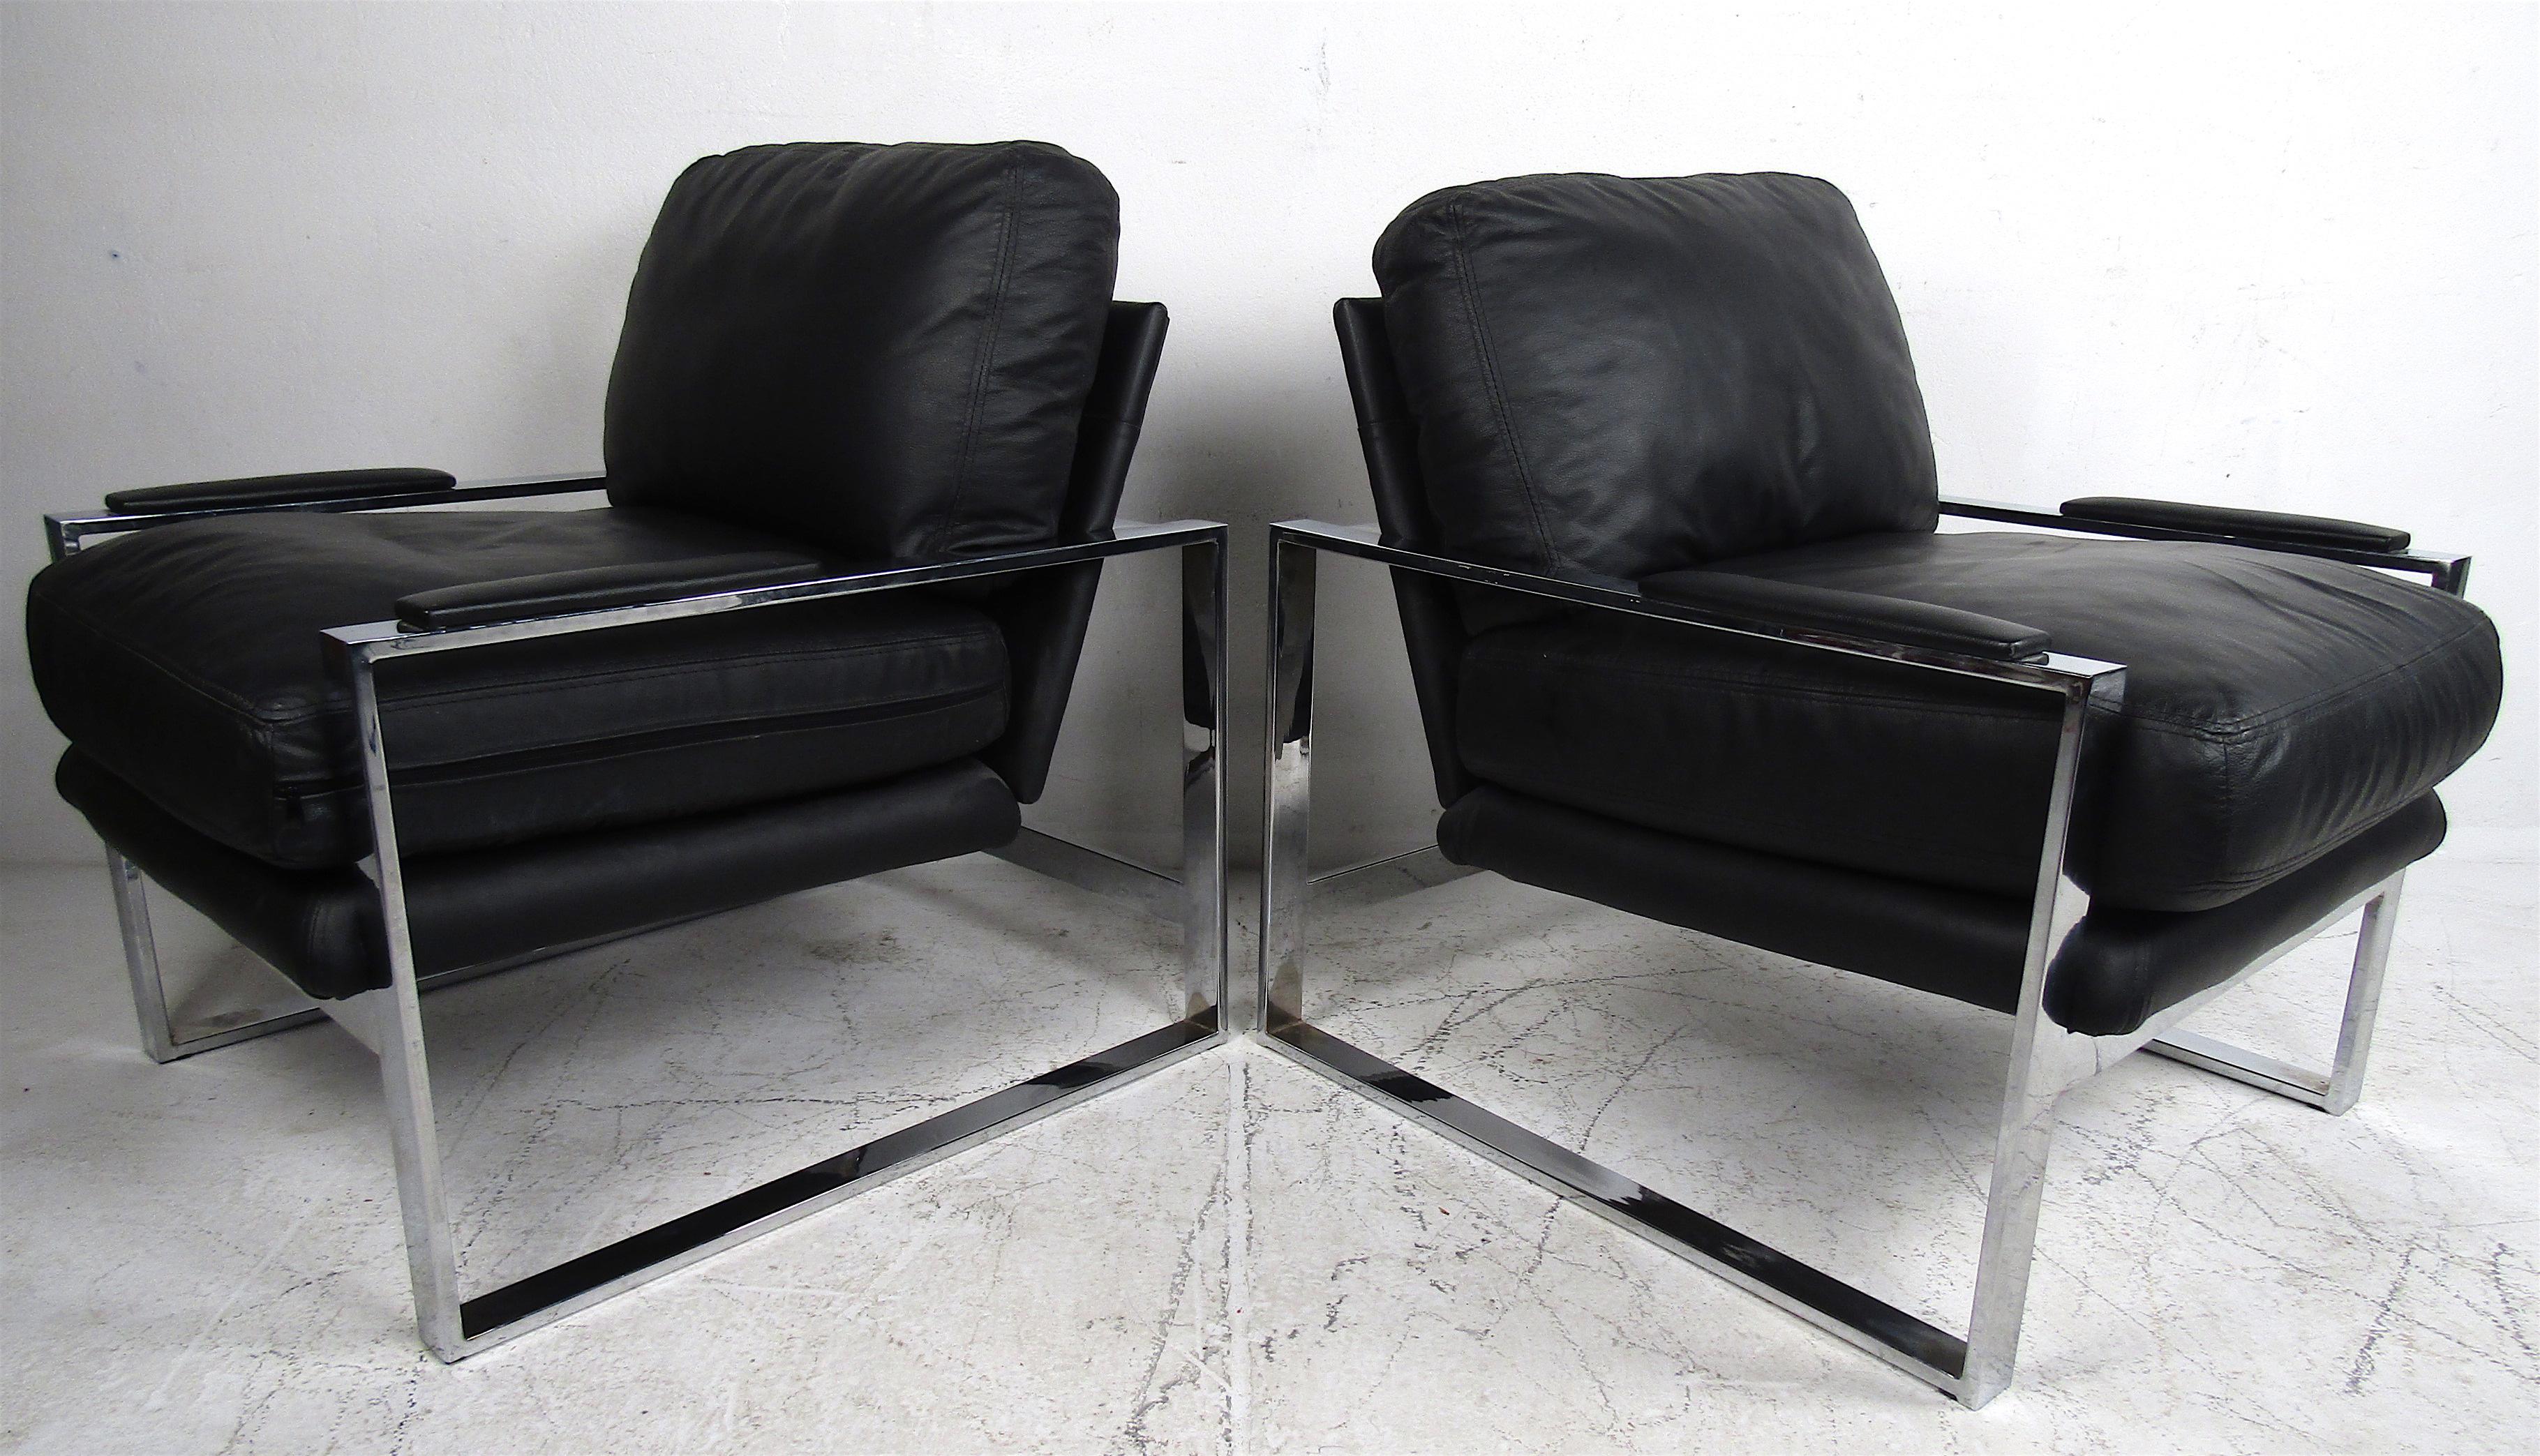 This stunning pair of modern lounge chairs boast overstuffed removable cushions and a heavy flat bar chrome frame. The padded armrests and smooth black leather upholstery make this pair the perfect addition to any seating arrangement. These make the